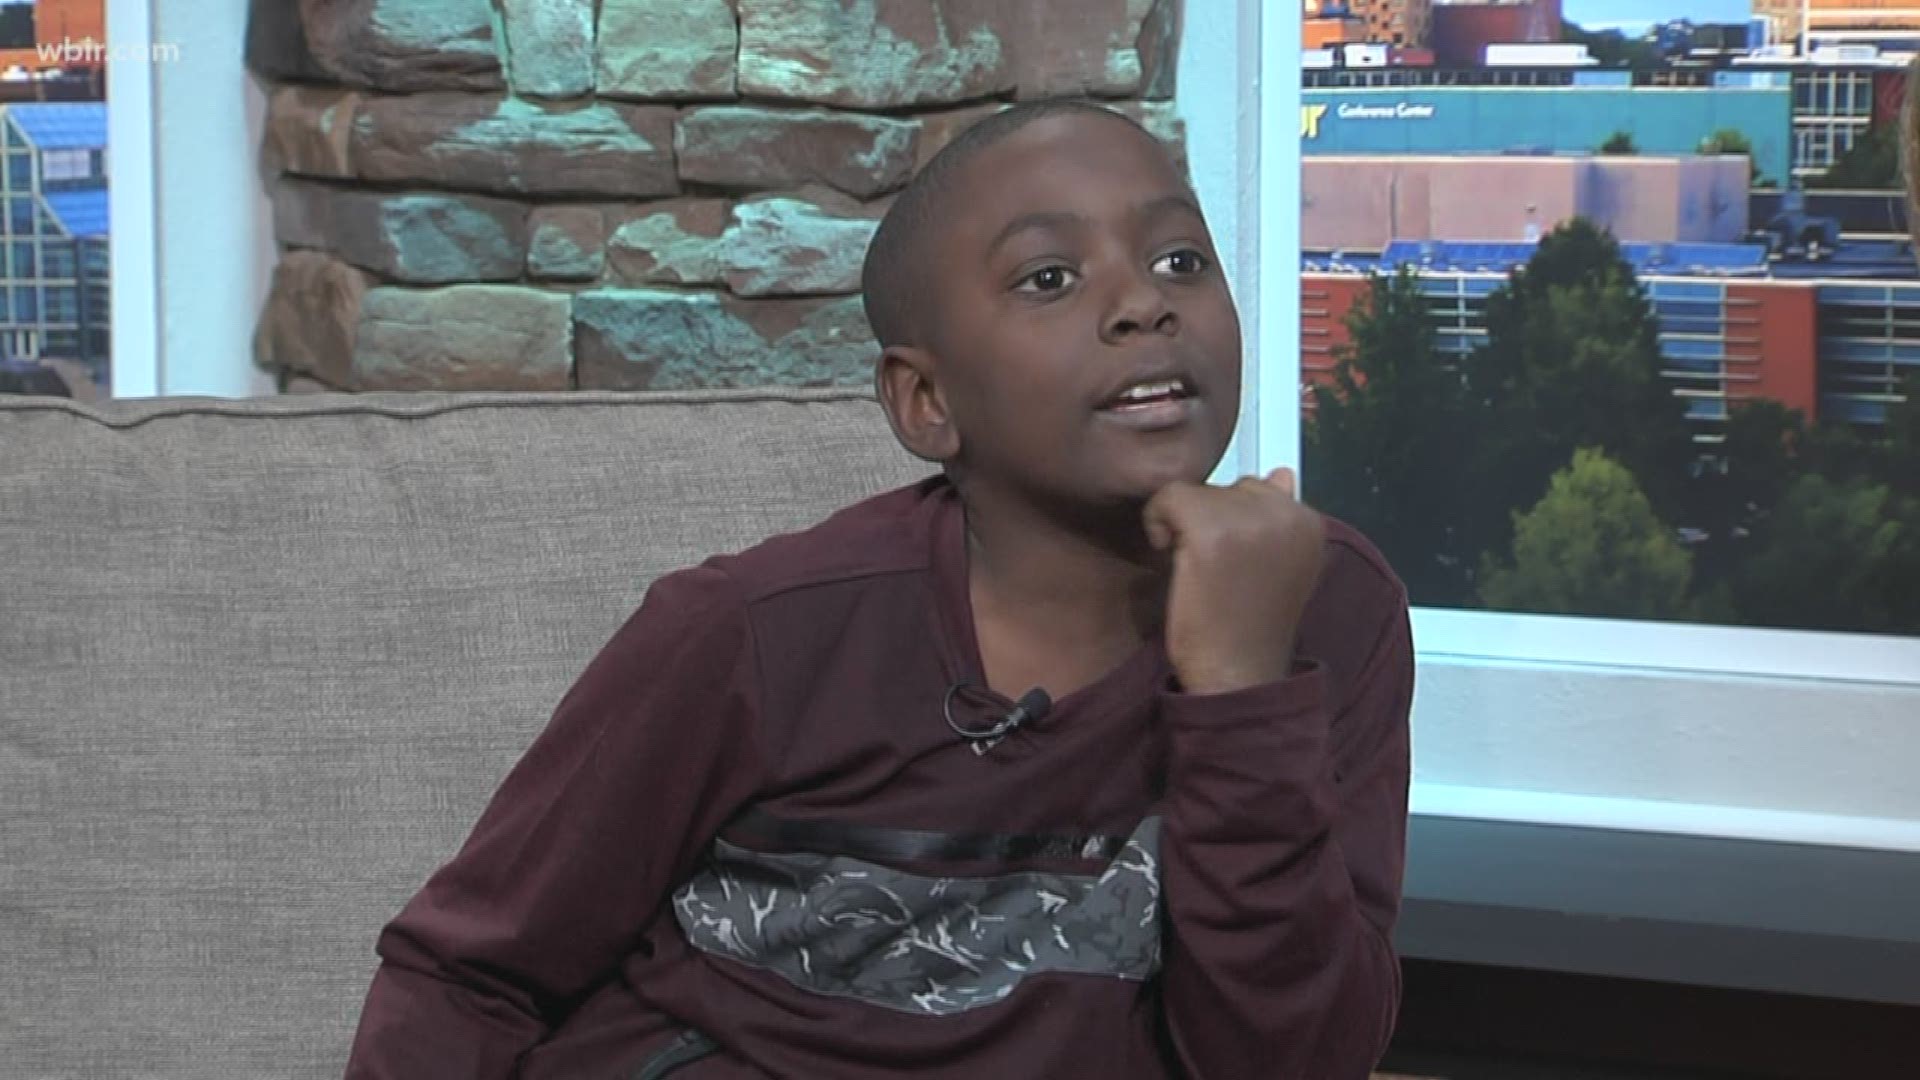 Azariah Arnold turns 9 years old today. He is celebrating with presents, a sushi dinner, and being today's Jr. Anchor. Nov. 12, 2019-4pm.